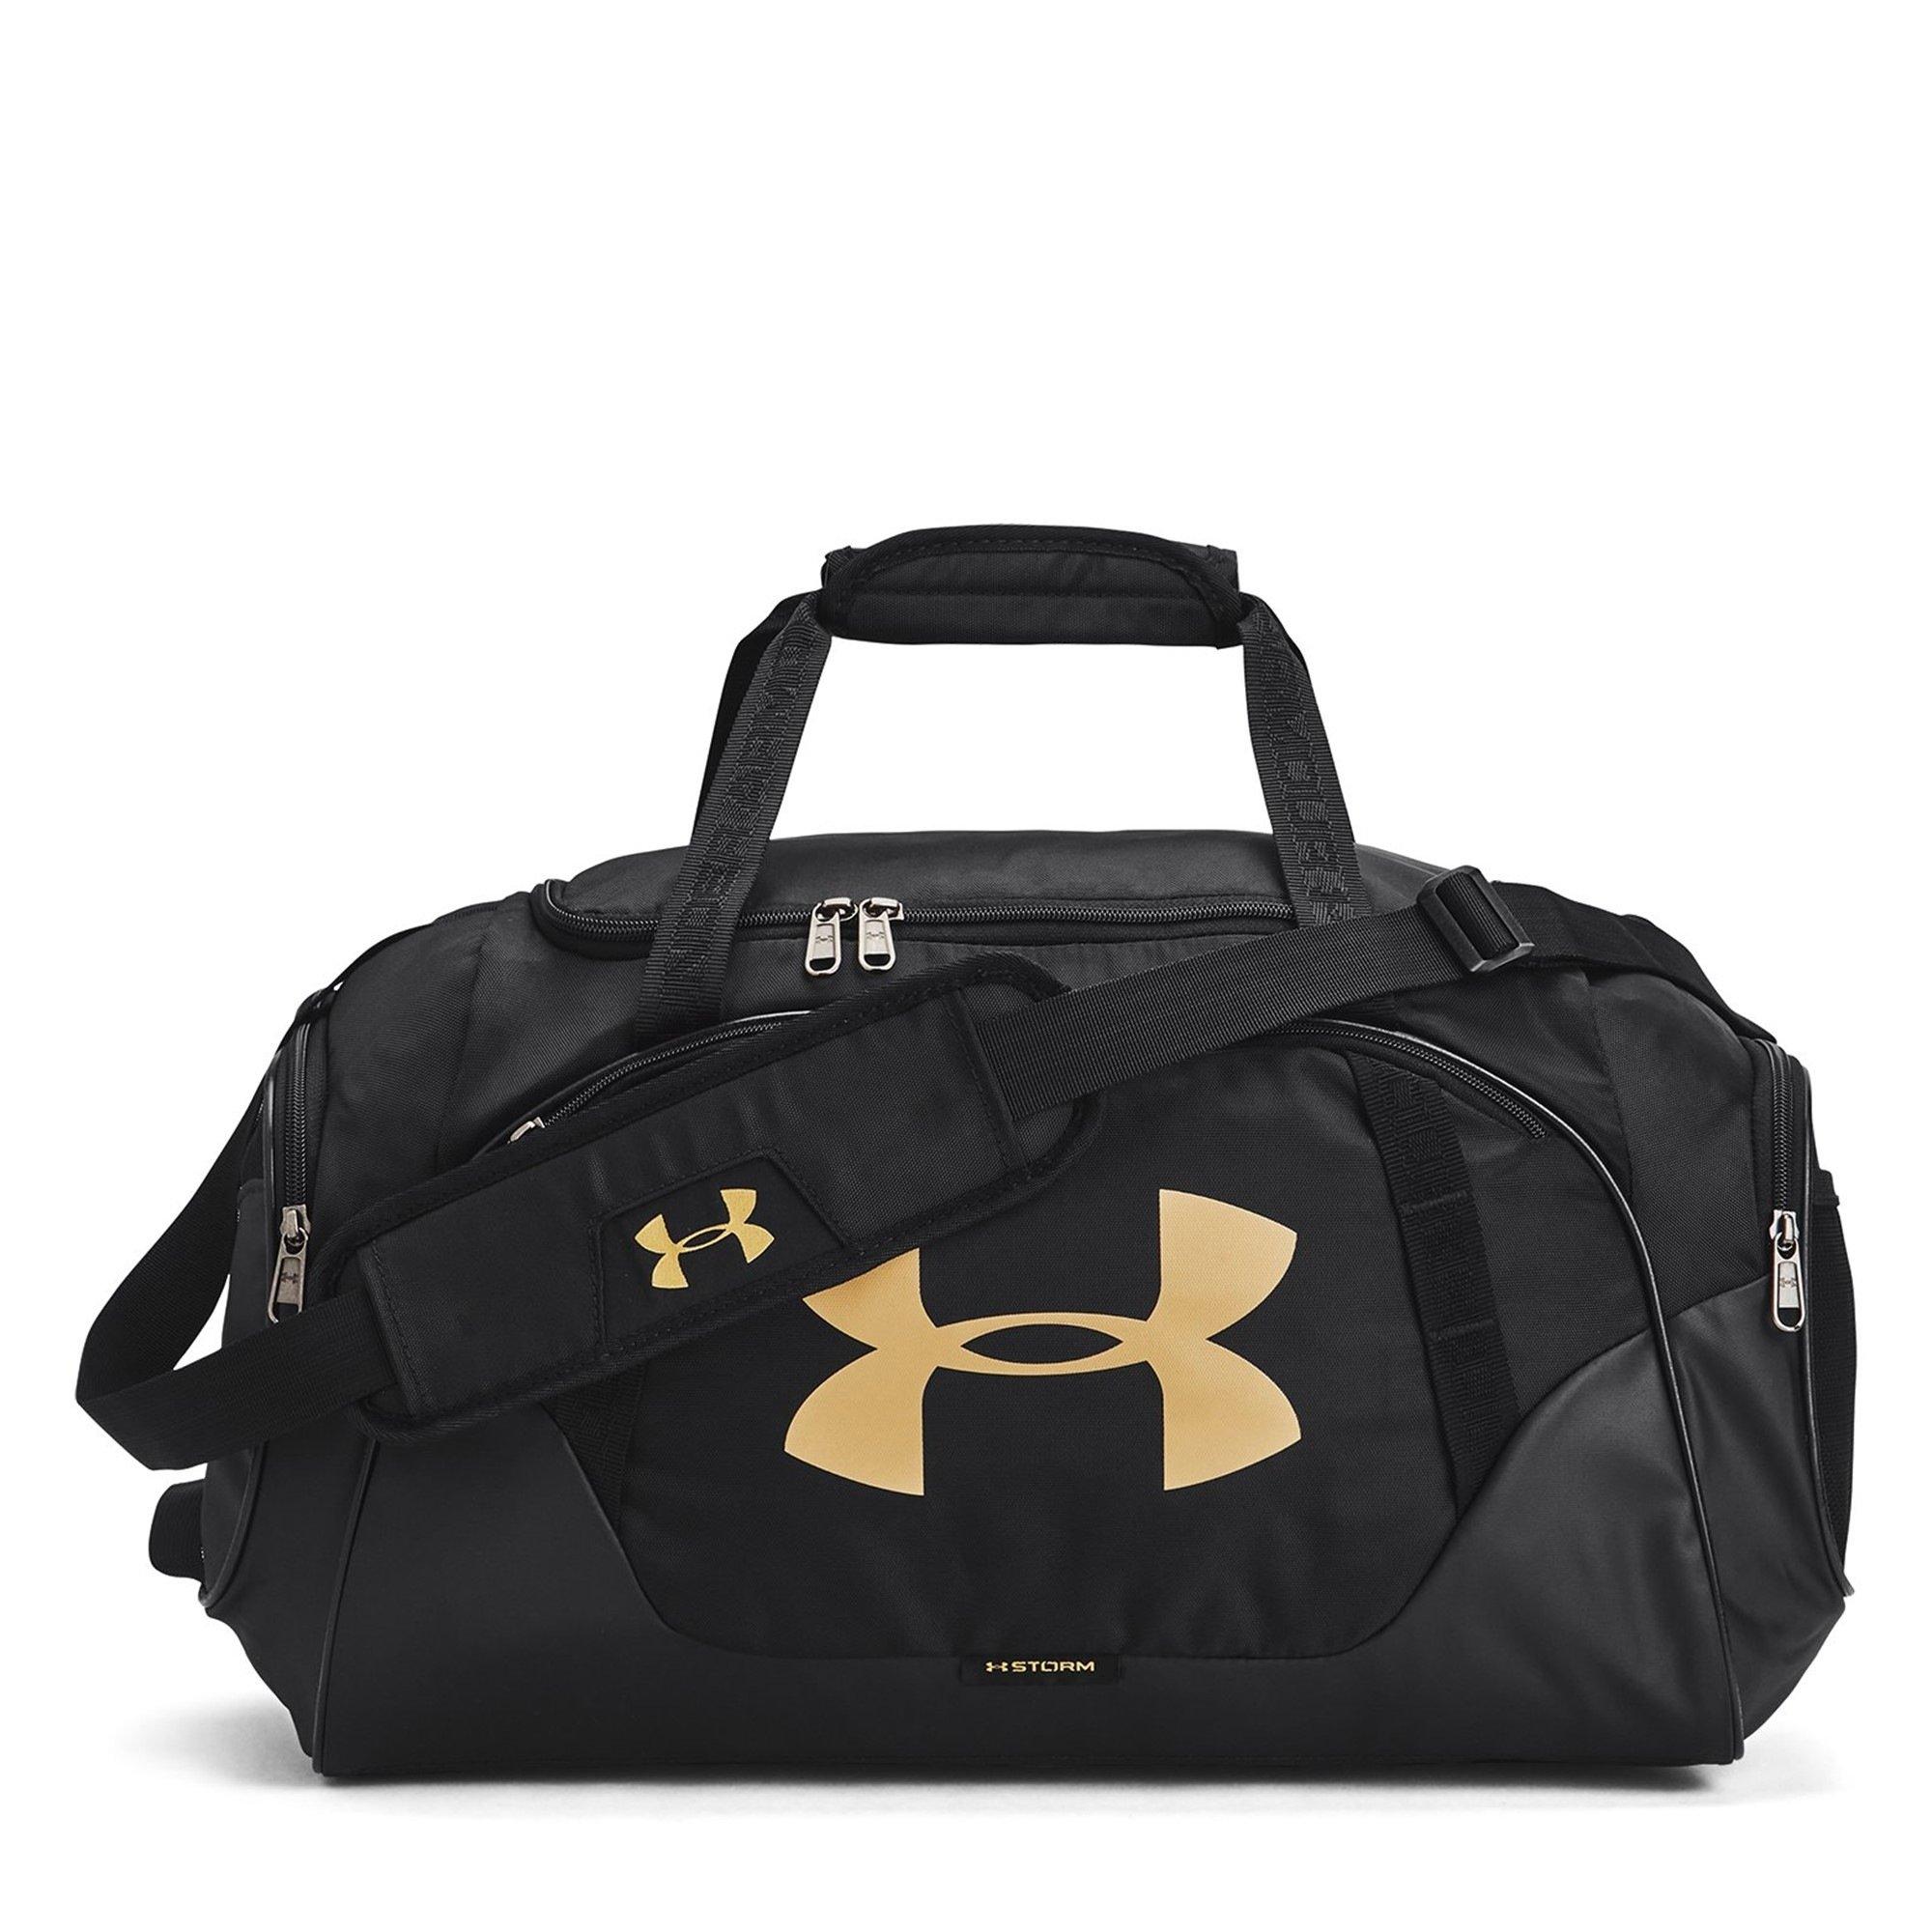 Under Armour | Undeniable 3.0 Small Duffle Bag | Holdalls | Sports ...